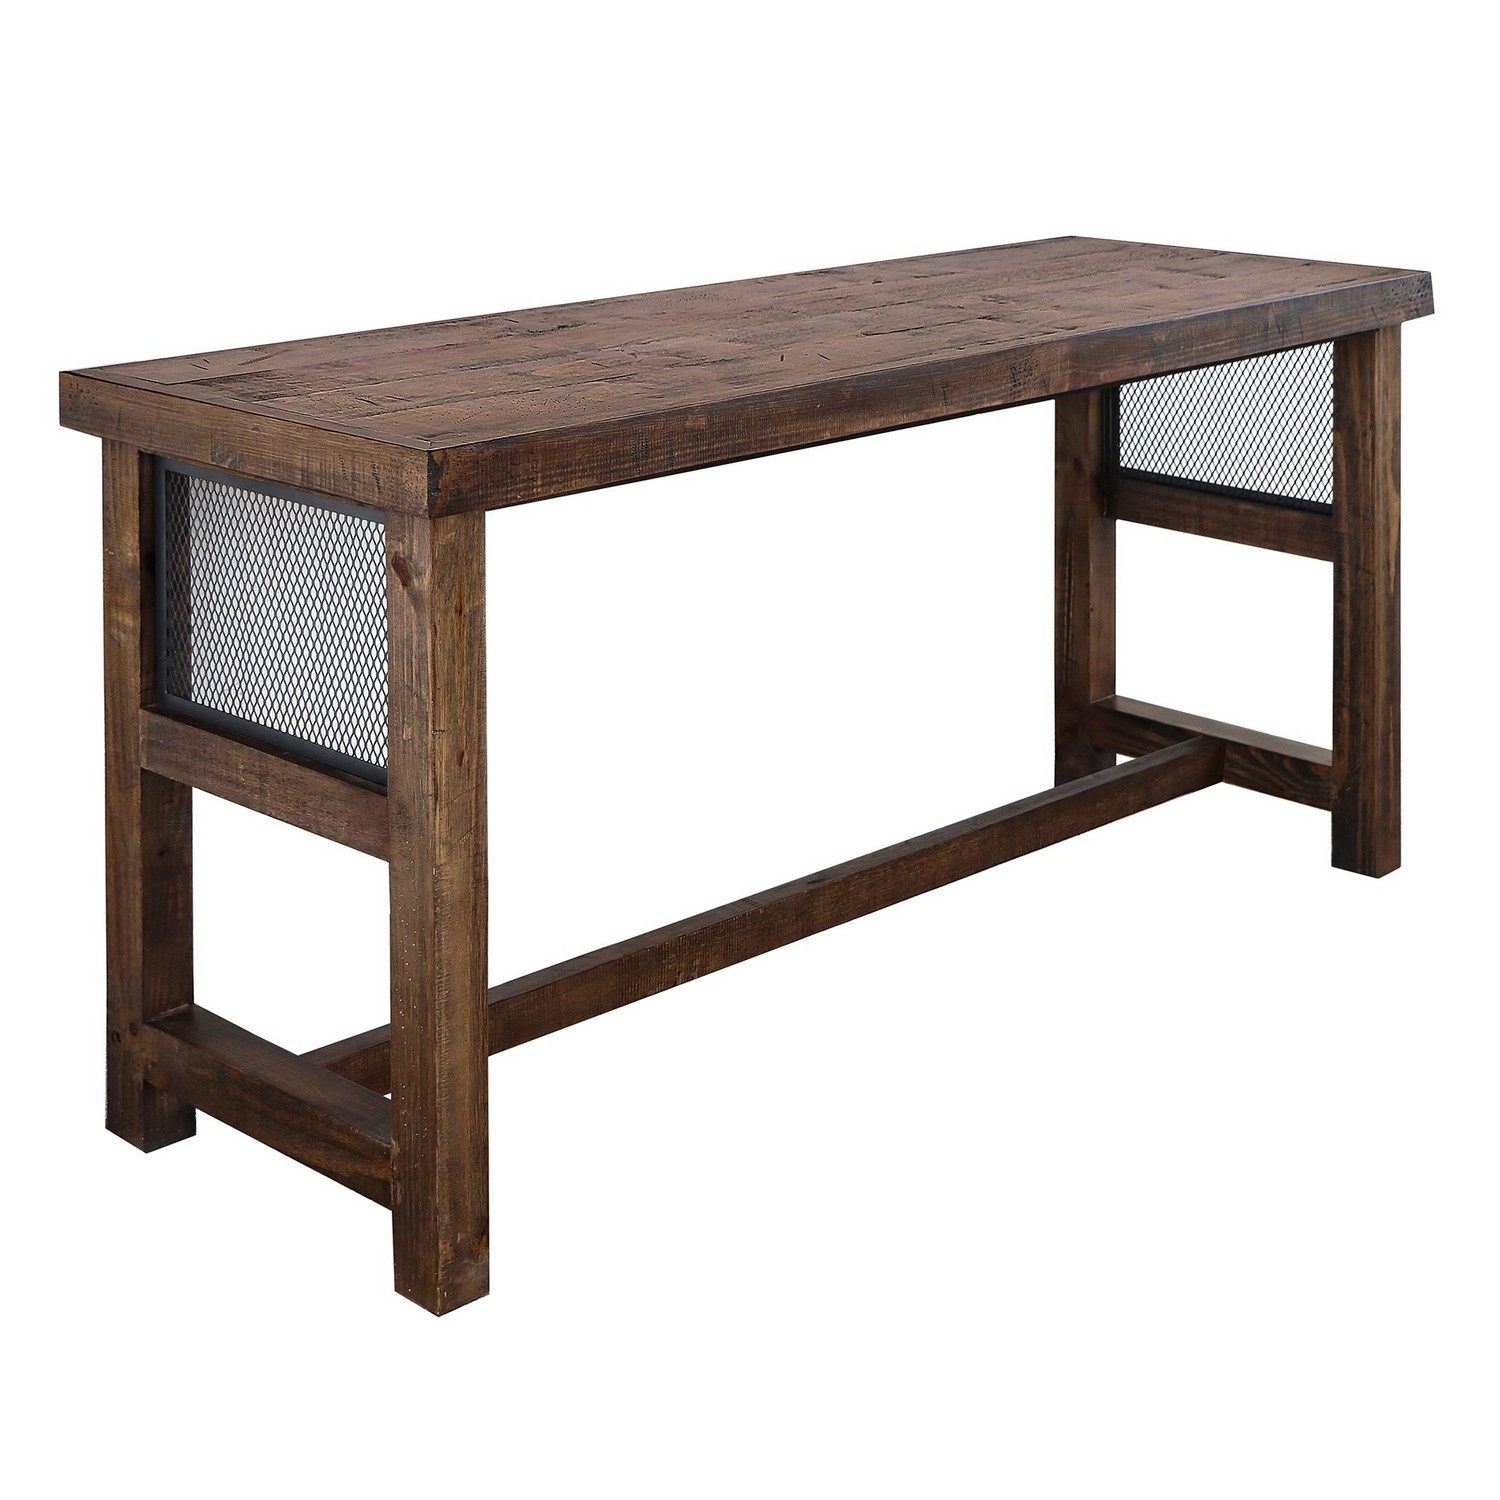 Parker House Lapaz Everywhere Console Table - Rustic Worn Pine